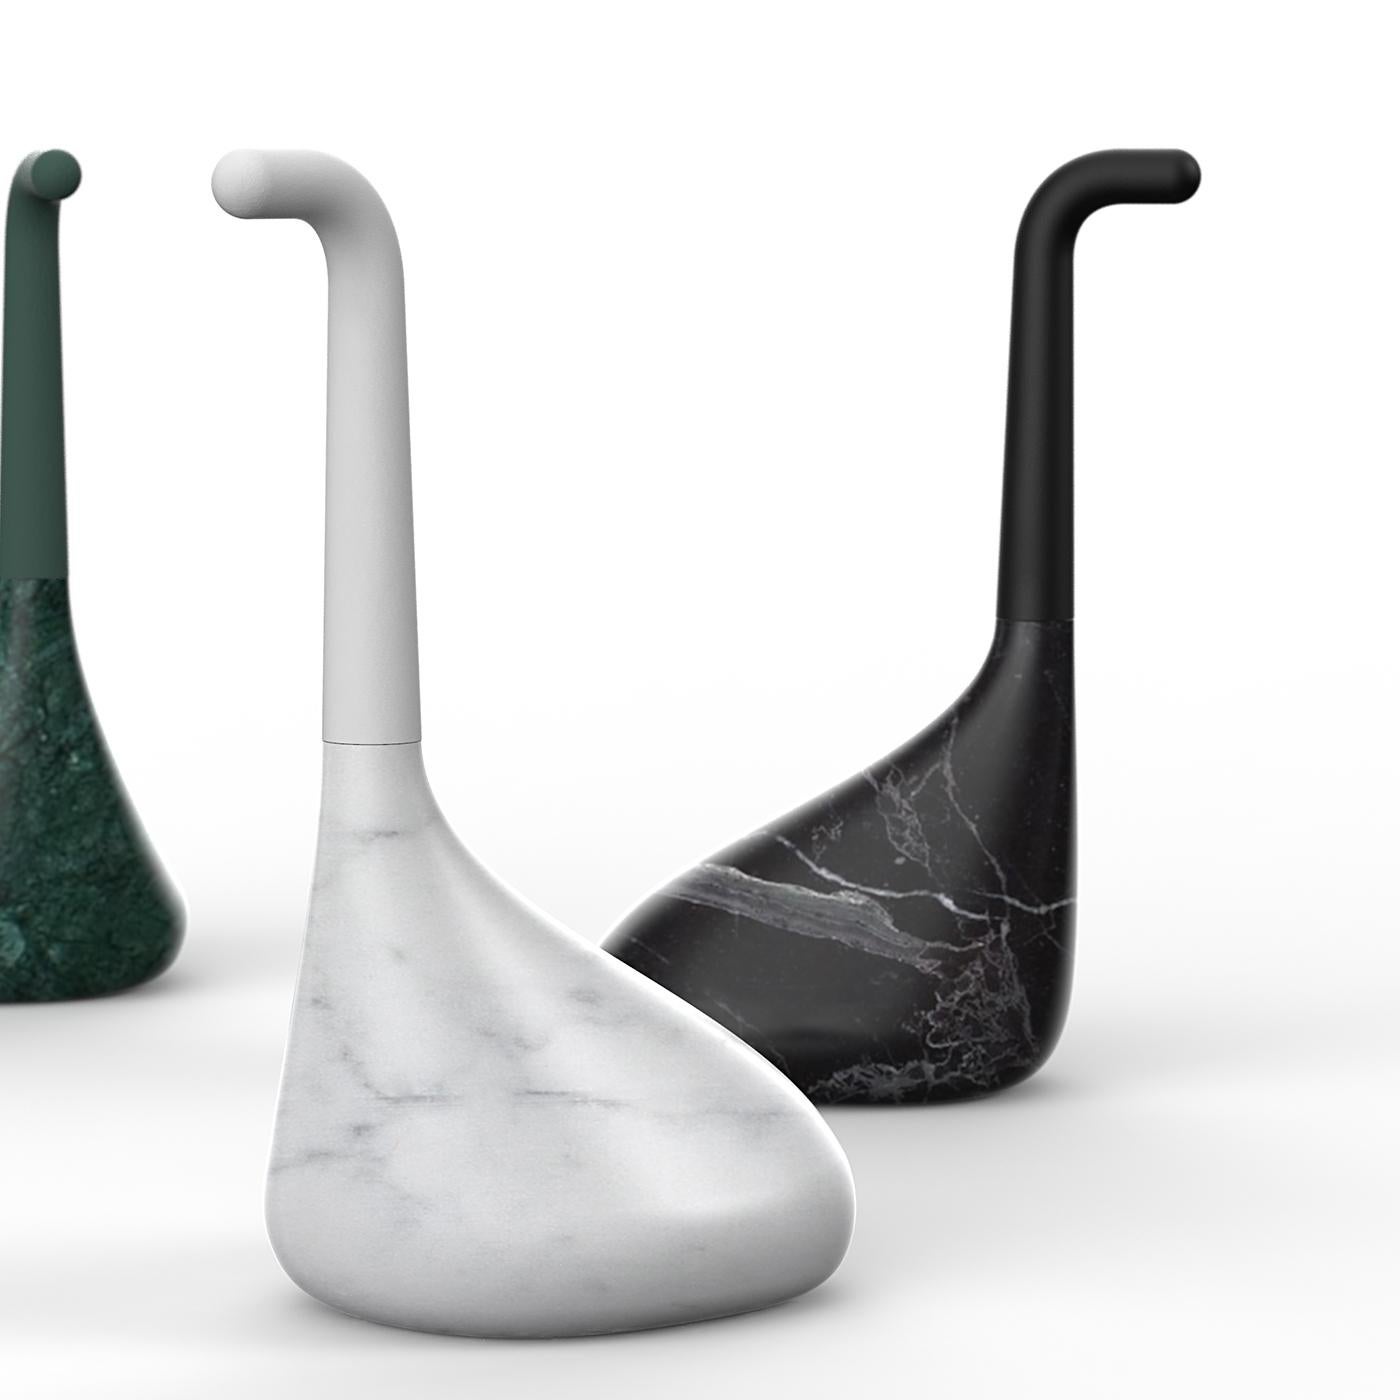 The Nessie Black Doorstop by Italian designer Luca Nichetto reproduces the iconic silhouette of the infamous Loch Ness Monster. Its solid marble base exudes a luxurious allure, defined by smooth lines and voluptuous curves. Boasting minimal